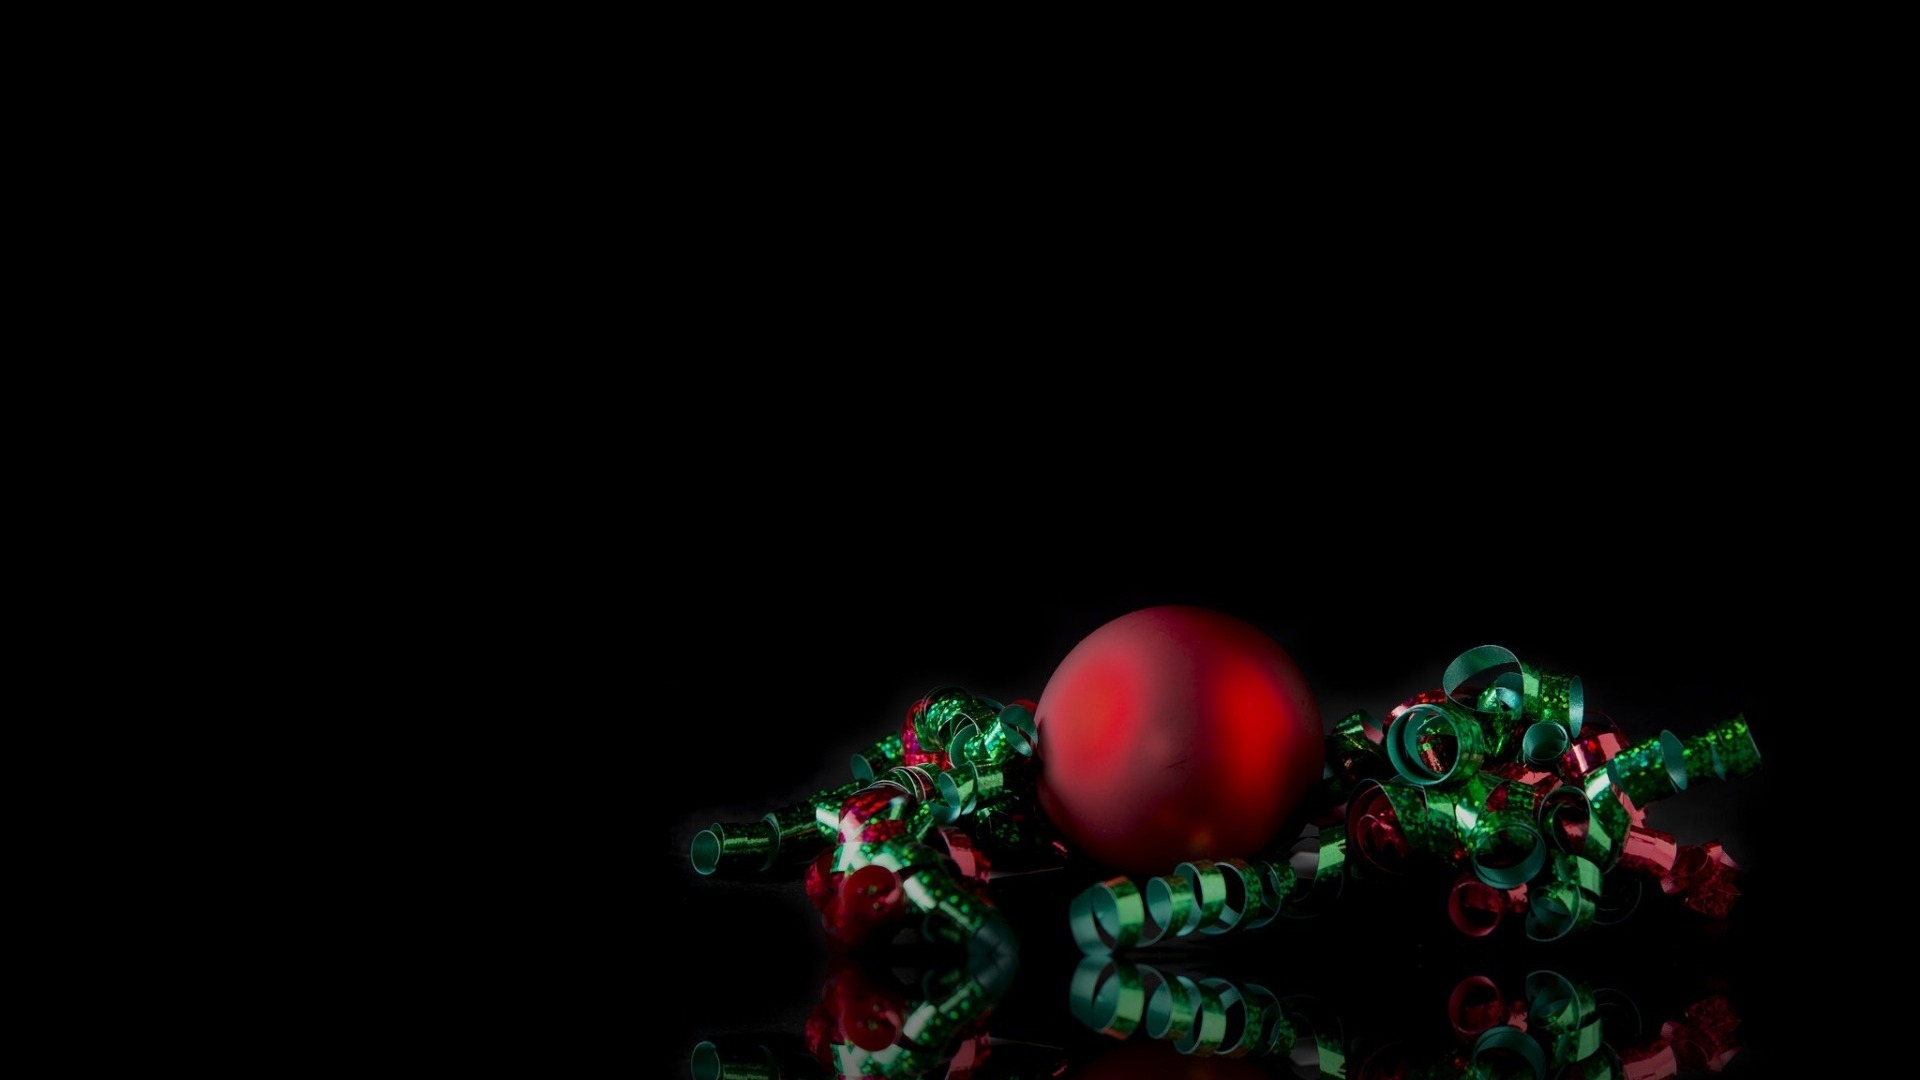 Simple Christmas Ornament for 1920 x 1080 HDTV 1080p resolution